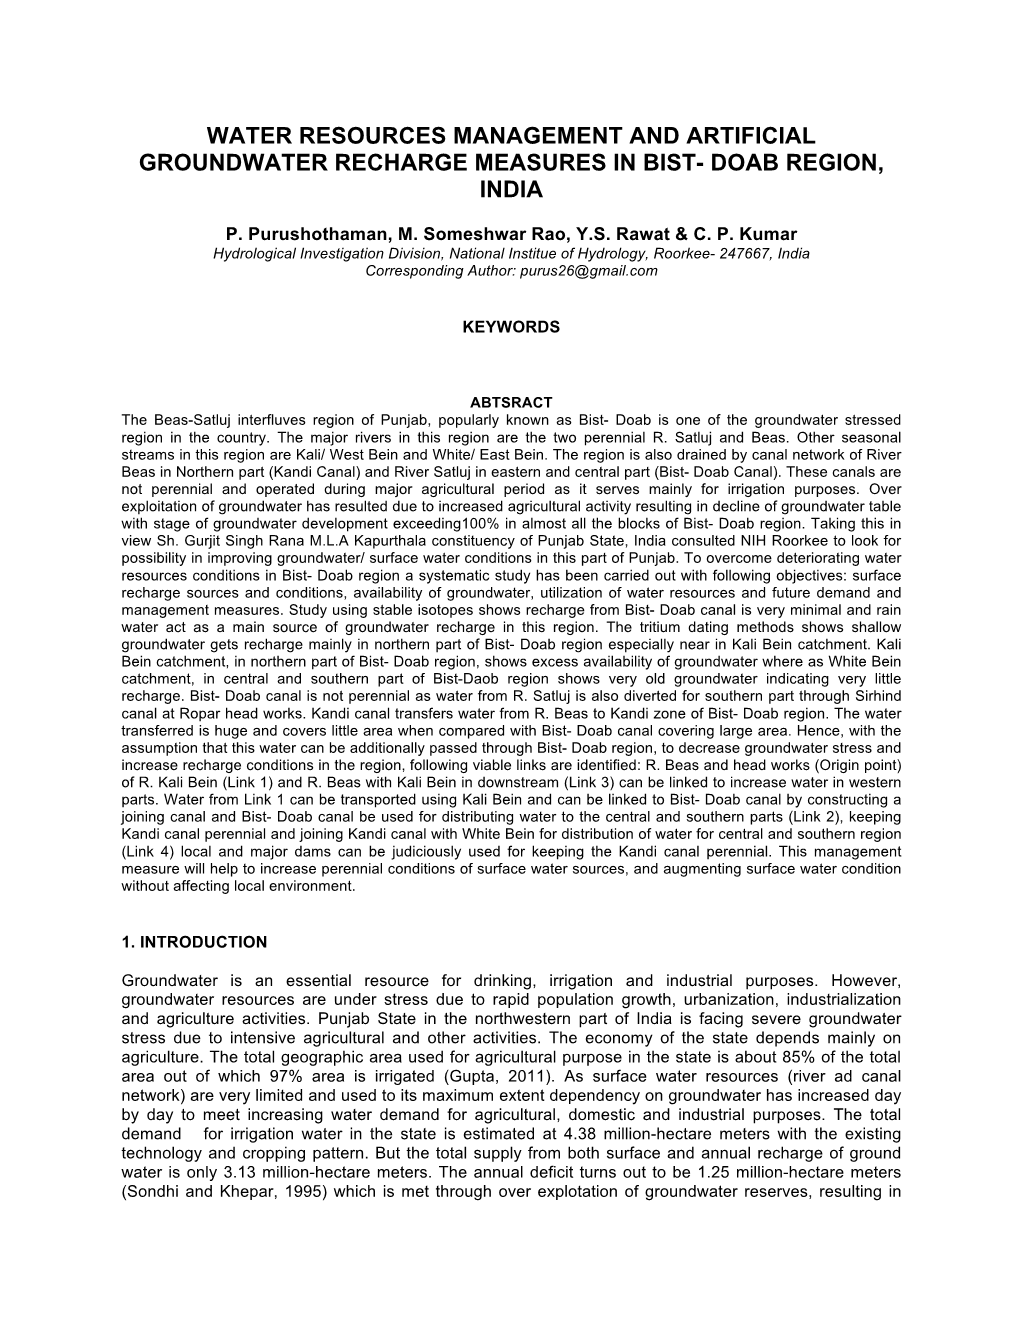 Water Resources Management and Artificial Groundwater Recharge Measures in Bist- Doab Region, India